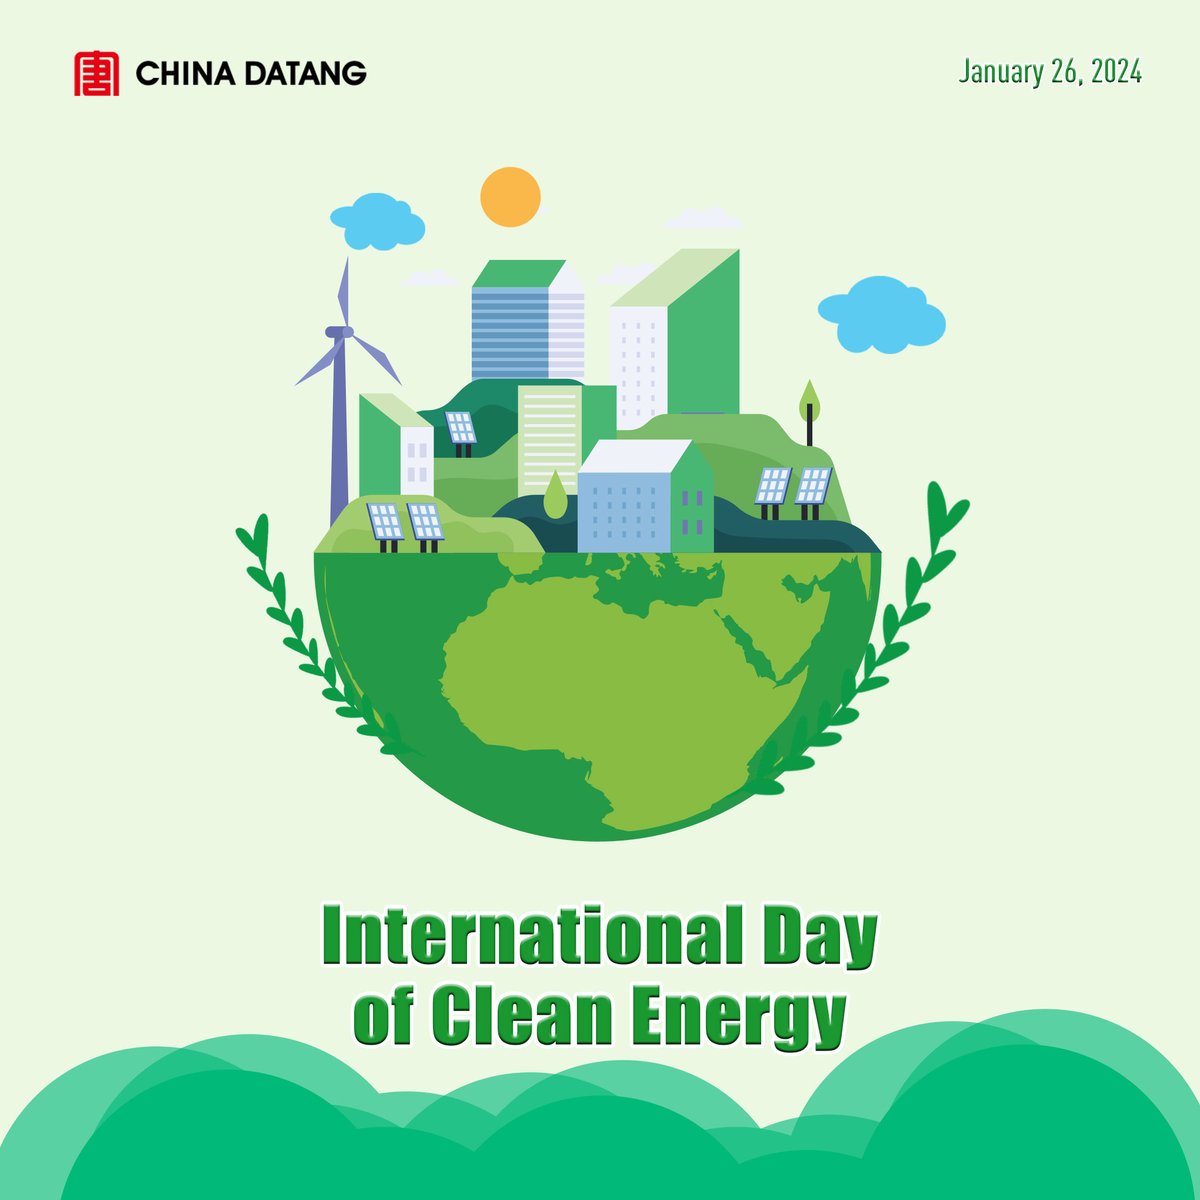 The #InternationalDayofCleanEnergy aims to raise awareness and mobilize action for transition to clean energy for the benefit of people and the planet. CDT has been committed to providing #cleanenergy to light up a better life, contributing to global sustainable development.